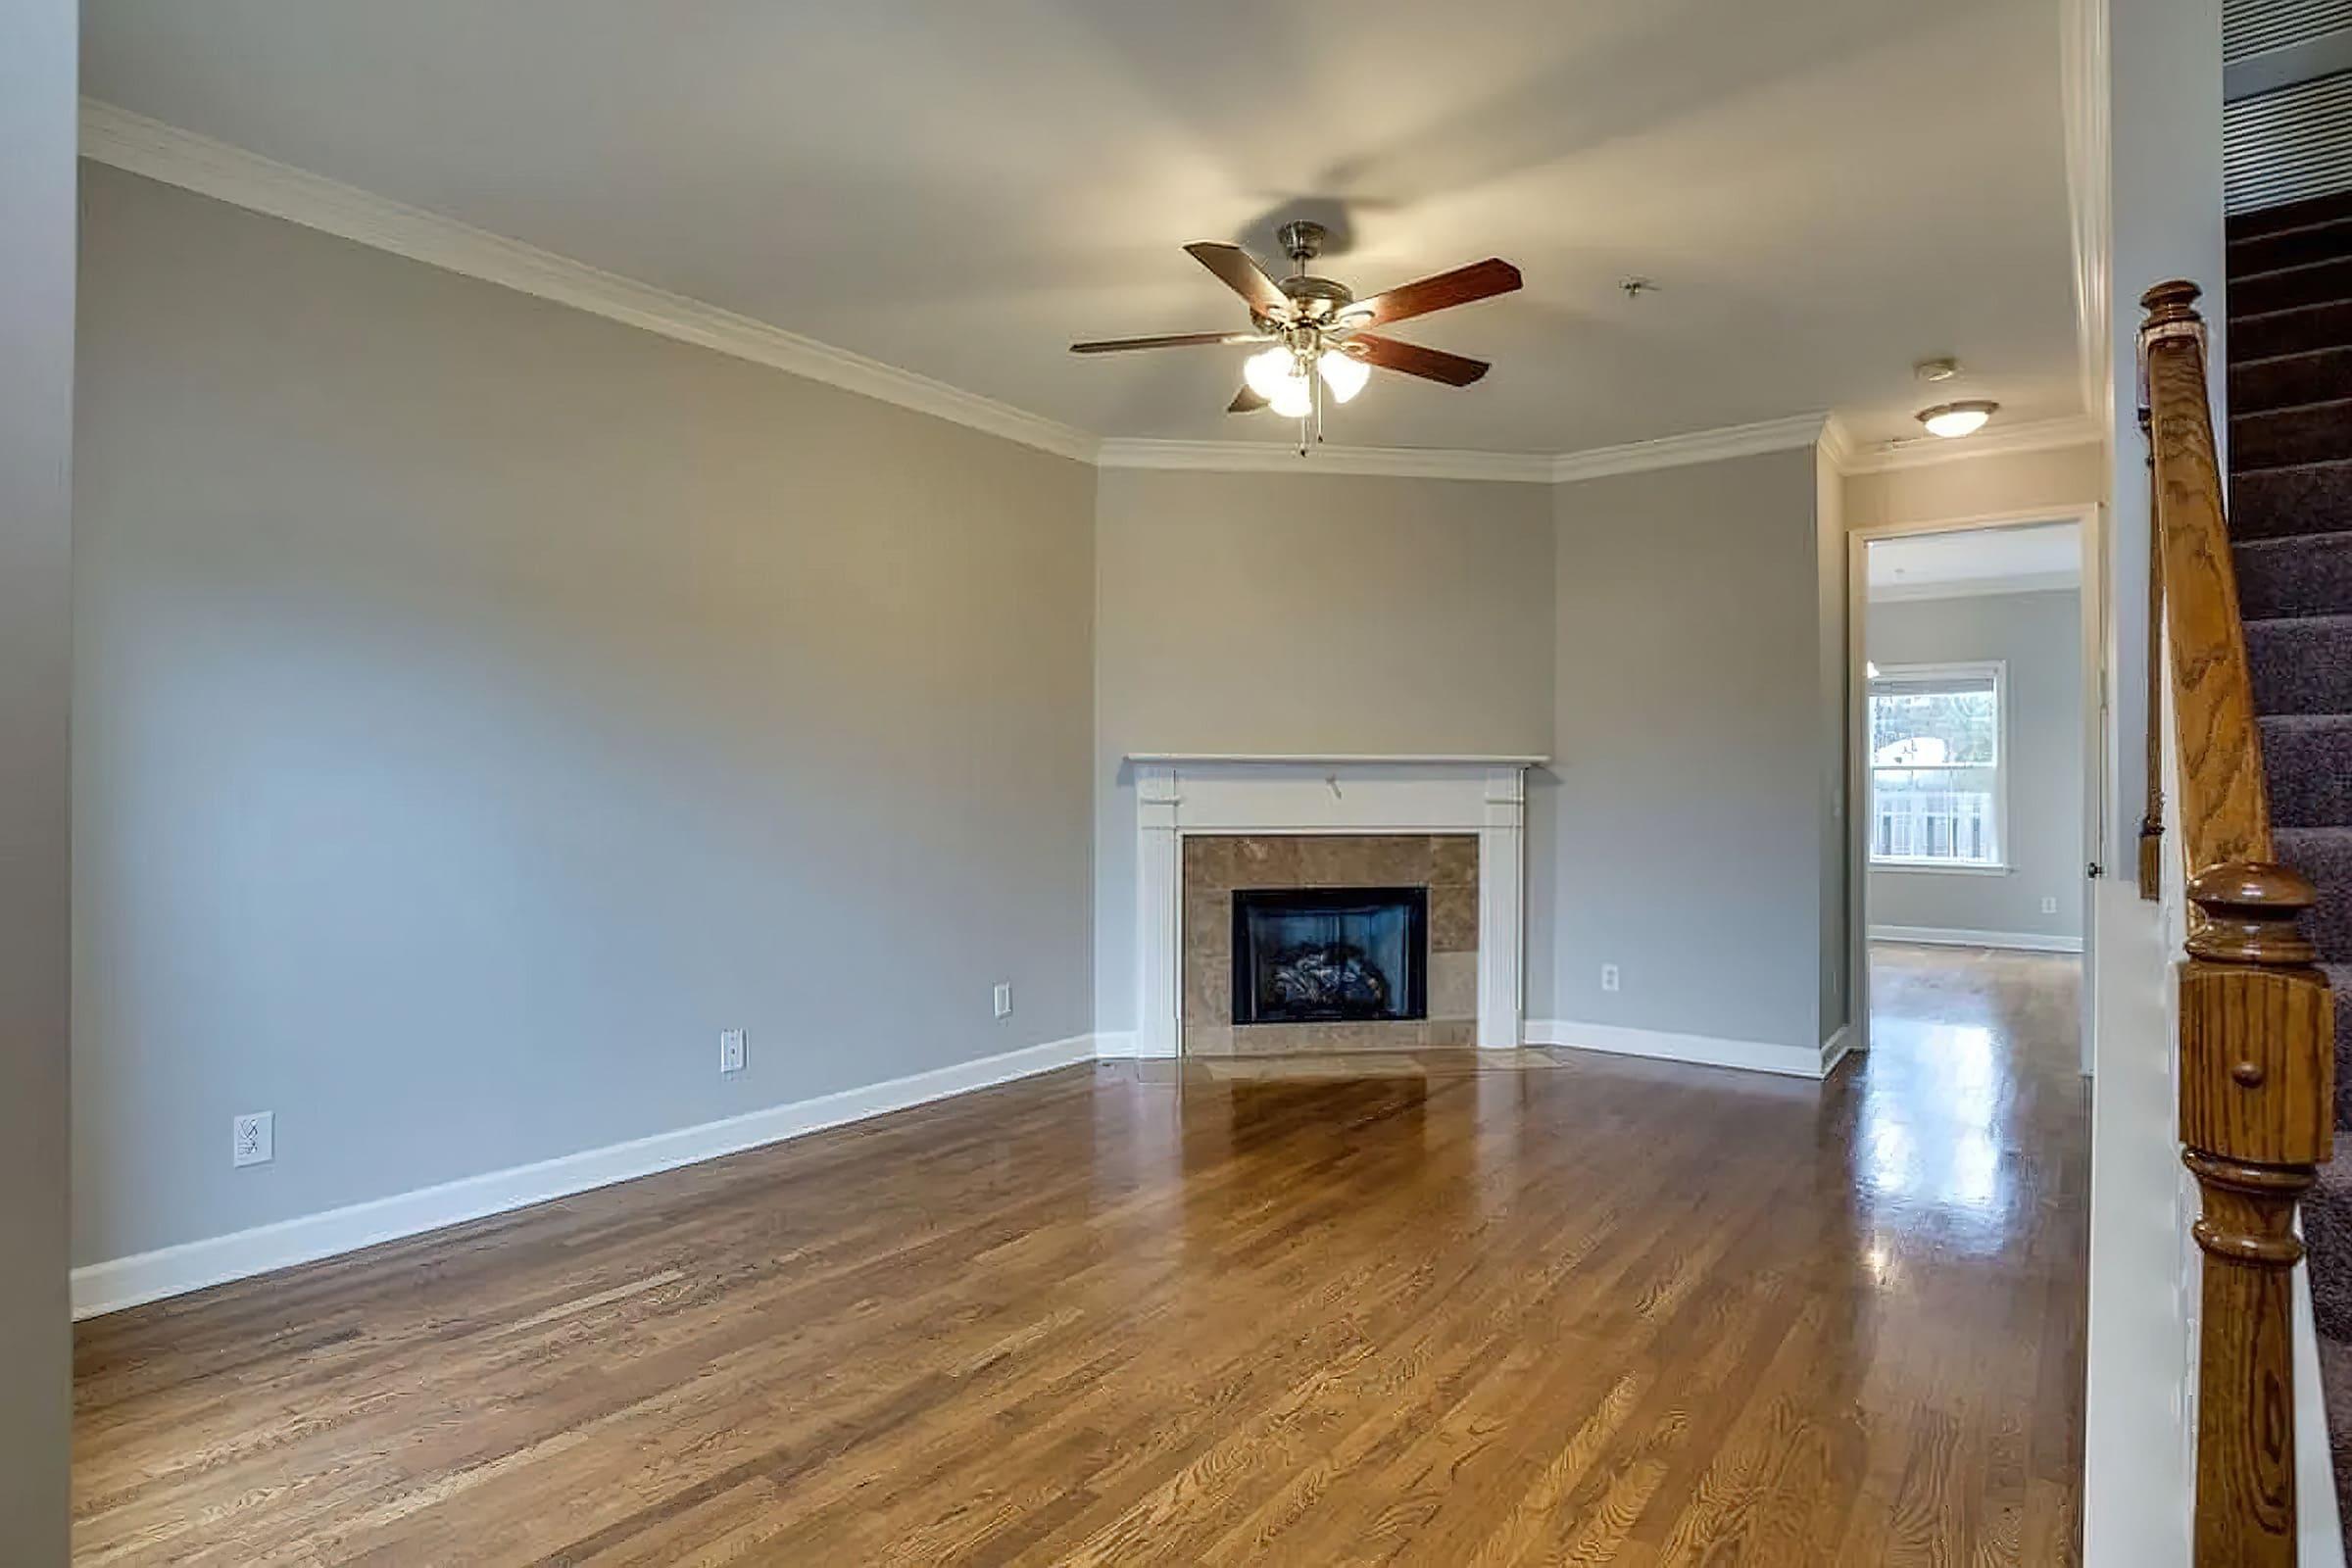 Two bedroom townhomes with gorgeous hardwood floors